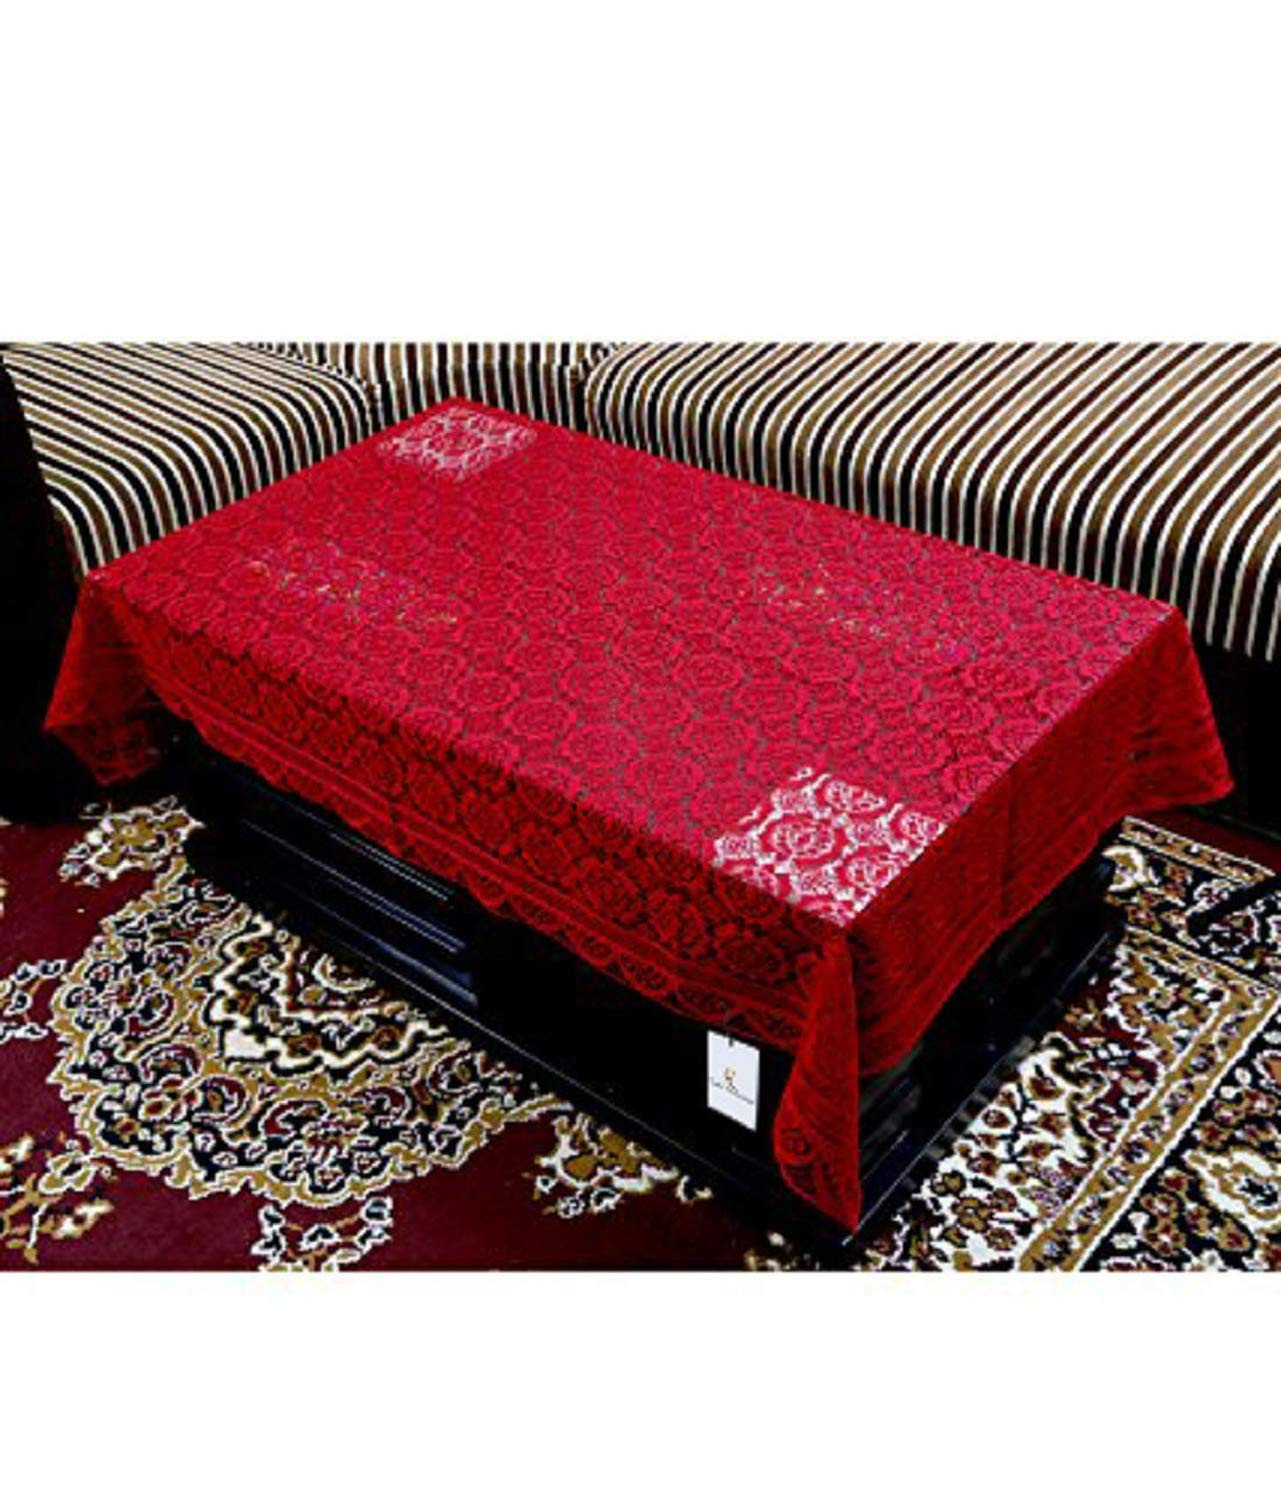 Kuber Industries Square Design Cotton 5 Seater Sofa Cover With 6 Pieces Arms cover And 1 Center Table Cover Use Both Side, Living Room, Drawing Room, Bedroom, Guest Room (Set Of17, Maroon)-KUBMRT12003